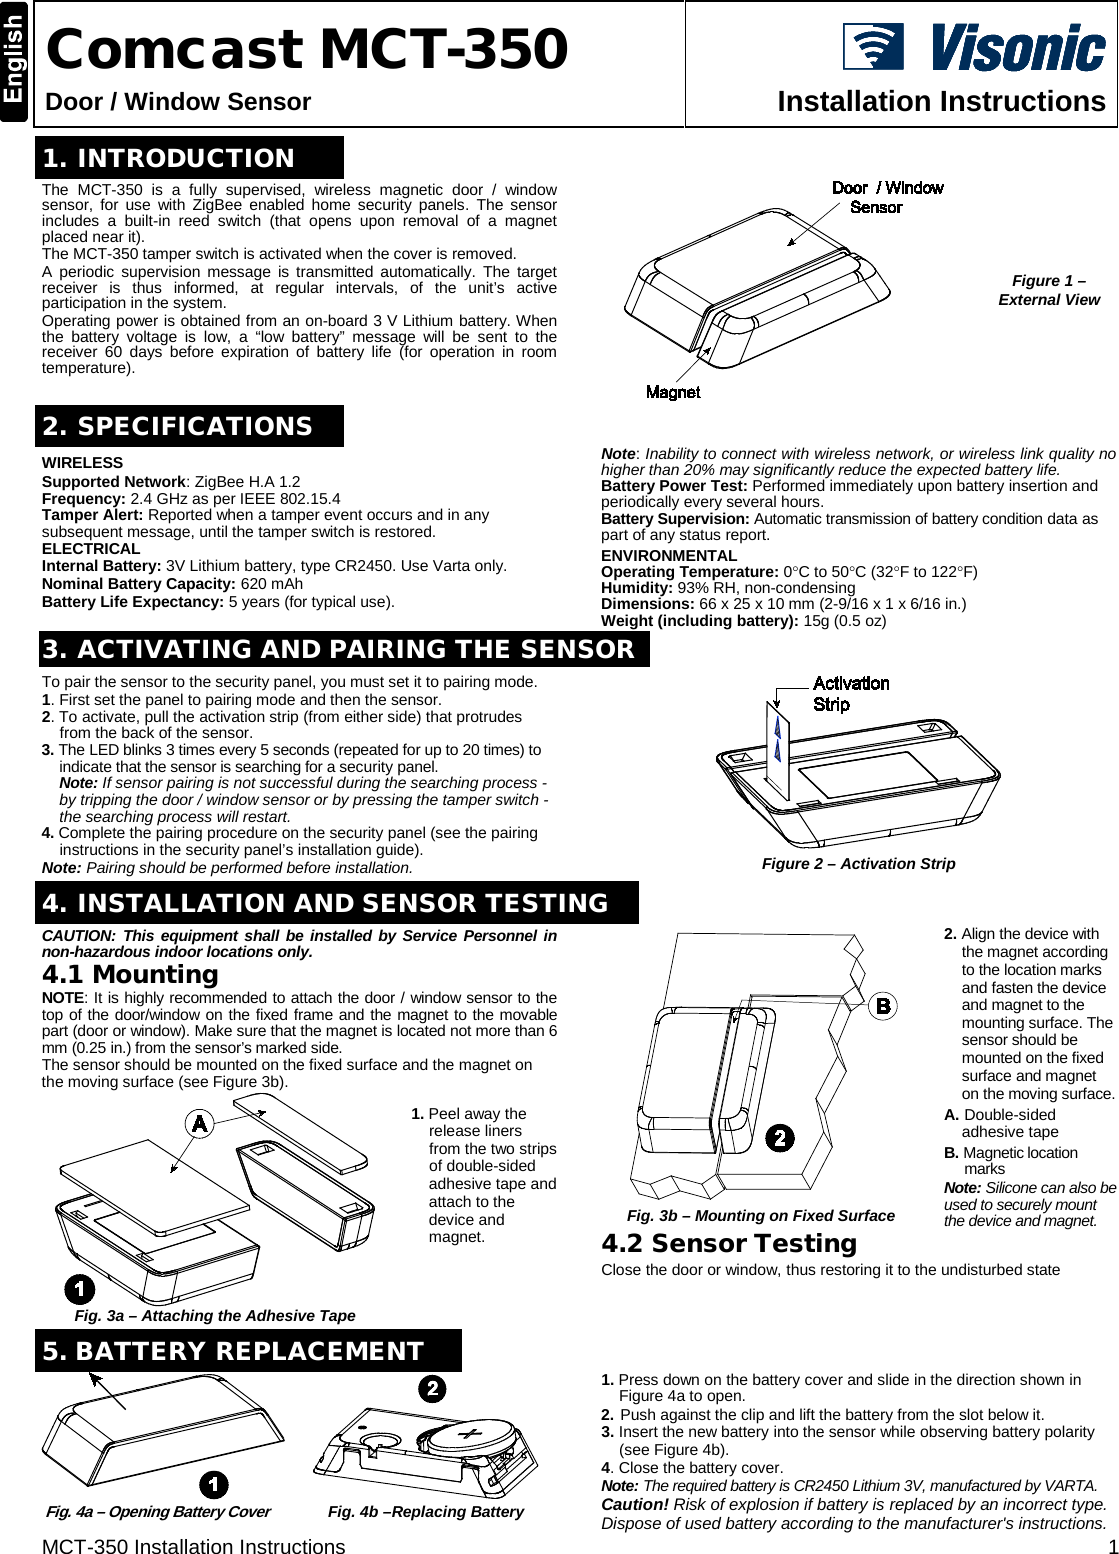 MCT-350 Installation Instructions  1  Comcast MCT-350 Door / Window Sensor  Installation Instructions  1. INTRODUCTION  The  MCT-350 is a fully supervised, wireless  magnetic  door / window sensor, for use with ZigBee enabled home security panels. The sensor includes a built-in reed switch (that opens upon removal of a magnet placed near it).  The MCT-350 tamper switch is activated when the cover is removed. A periodic supervision message is transmitted automatically. The target receiver is thus informed, at regular intervals, of the unit’s active participation in the system. Operating power is obtained from an on-board 3 V Lithium battery. When the battery voltage is low, a “low battery” message will be sent to the receiver 60  days before expiration of battery life (for operation in room temperature).  Figure 1 – External View 2. SPECIFICATIONS WIRELESS Supported Network: ZigBee H.A 1.2 Frequency: 2.4 GHz as per IEEE 802.15.4 Tamper Alert: Reported when a tamper event occurs and in any subsequent message, until the tamper switch is restored. ELECTRICAL Internal Battery: 3V Lithium battery, type CR2450. Use Varta only. Nominal Battery Capacity: 620 mAh Battery Life Expectancy: 5 years (for typical use). Note: Inability to connect with wireless network, or wireless link quality no higher than 20% may significantly reduce the expected battery life. Battery Power Test: Performed immediately upon battery insertion and periodically every several hours. Battery Supervision: Automatic transmission of battery condition data as part of any status report. ENVIRONMENTAL  Operating Temperature: 0°C to 50°C (32°F to 122°F) Humidity: 93% RH, non-condensing Dimensions: 66 x 25 x 10 mm (2-9/16 x 1 x 6/16 in.) Weight (including battery): 15g (0.5 oz) 3. ACTIVATING AND PAIRING THE SENSORTo pair the sensor to the security panel, you must set it to pairing mode. 1. First set the panel to pairing mode and then the sensor. 2. To activate, pull the activation strip (from either side) that protrudes from the back of the sensor. 3. The LED blinks 3 times every 5 seconds (repeated for up to 20 times) to indicate that the sensor is searching for a security panel.  Note: If sensor pairing is not successful during the searching process - by tripping the door / window sensor or by pressing the tamper switch - the searching process will restart. 4. Complete the pairing procedure on the security panel (see the pairing instructions in the security panel’s installation guide). Note: Pairing should be performed before installation.  Figure 2 – Activation Strip   4. INSTALLATION AND SENSOR TESTING CAUTION:  This equipment shall be installed by Service Personnel in non-hazardous indoor locations only. 4.1 Mounting NOTE: It is highly recommended to attach the door / window sensor to the top of the door/window on the fixed frame and the magnet to the movable part (door or window). Make sure that the magnet is located not more than 6 mm (0.25 in.) from the sensor’s marked side.  The sensor should be mounted on the fixed surface and the magnet on the moving surface (see Figure 3b).  Fig. 3a – Attaching the Adhesive Tape 1. Peel away the release liners from the two strips of double-sided adhesive tape and attach to the device and magnet.     Fig. 3b – Mounting on Fixed Surface 2. Align the device with the magnet according to the location marks and fasten the device and magnet to the mounting surface. The sensor should be mounted on the fixed surface and magnet on the moving surface. A. Double-sided adhesive tape B. Magnetic location marks Note: Silicone can also be used to securely mount the device and magnet. 4.2 Sensor Testing Close the door or window, thus restoring it to the undisturbed state5. BATTERY REPLACEMENT  Fig. 4a – Opening Battery Cover  Fig. 4b –Replacing Battery 1. Press down on the battery cover and slide in the direction shown in Figure 4a to open. 2. Push against the clip and lift the battery from the slot below it. 3. Insert the new battery into the sensor while observing battery polarity (see Figure 4b). 4. Close the battery cover. Note: The required battery is CR2450 Lithium 3V, manufactured by VARTA. Caution! Risk of explosion if battery is replaced by an incorrect type. Dispose of used battery according to the manufacturer&apos;s instructions. 